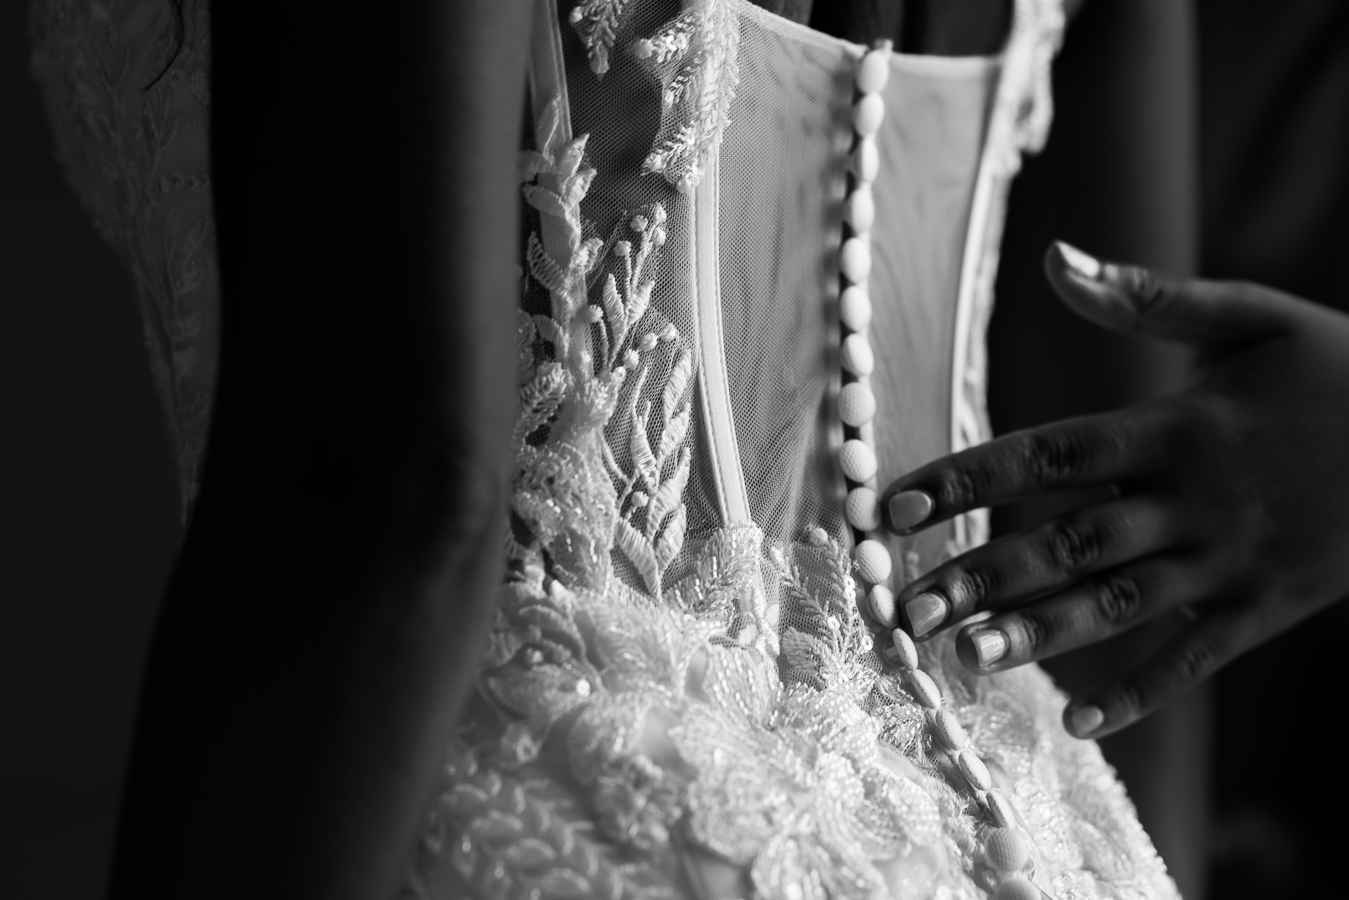 dc wedding photographer, Lisa Rhinehart, captures this black and white close up image at the st regis hotel of the back of the brides wedding gown as she is being buttoned up before her Multicultural DC Wedding at st francis hall